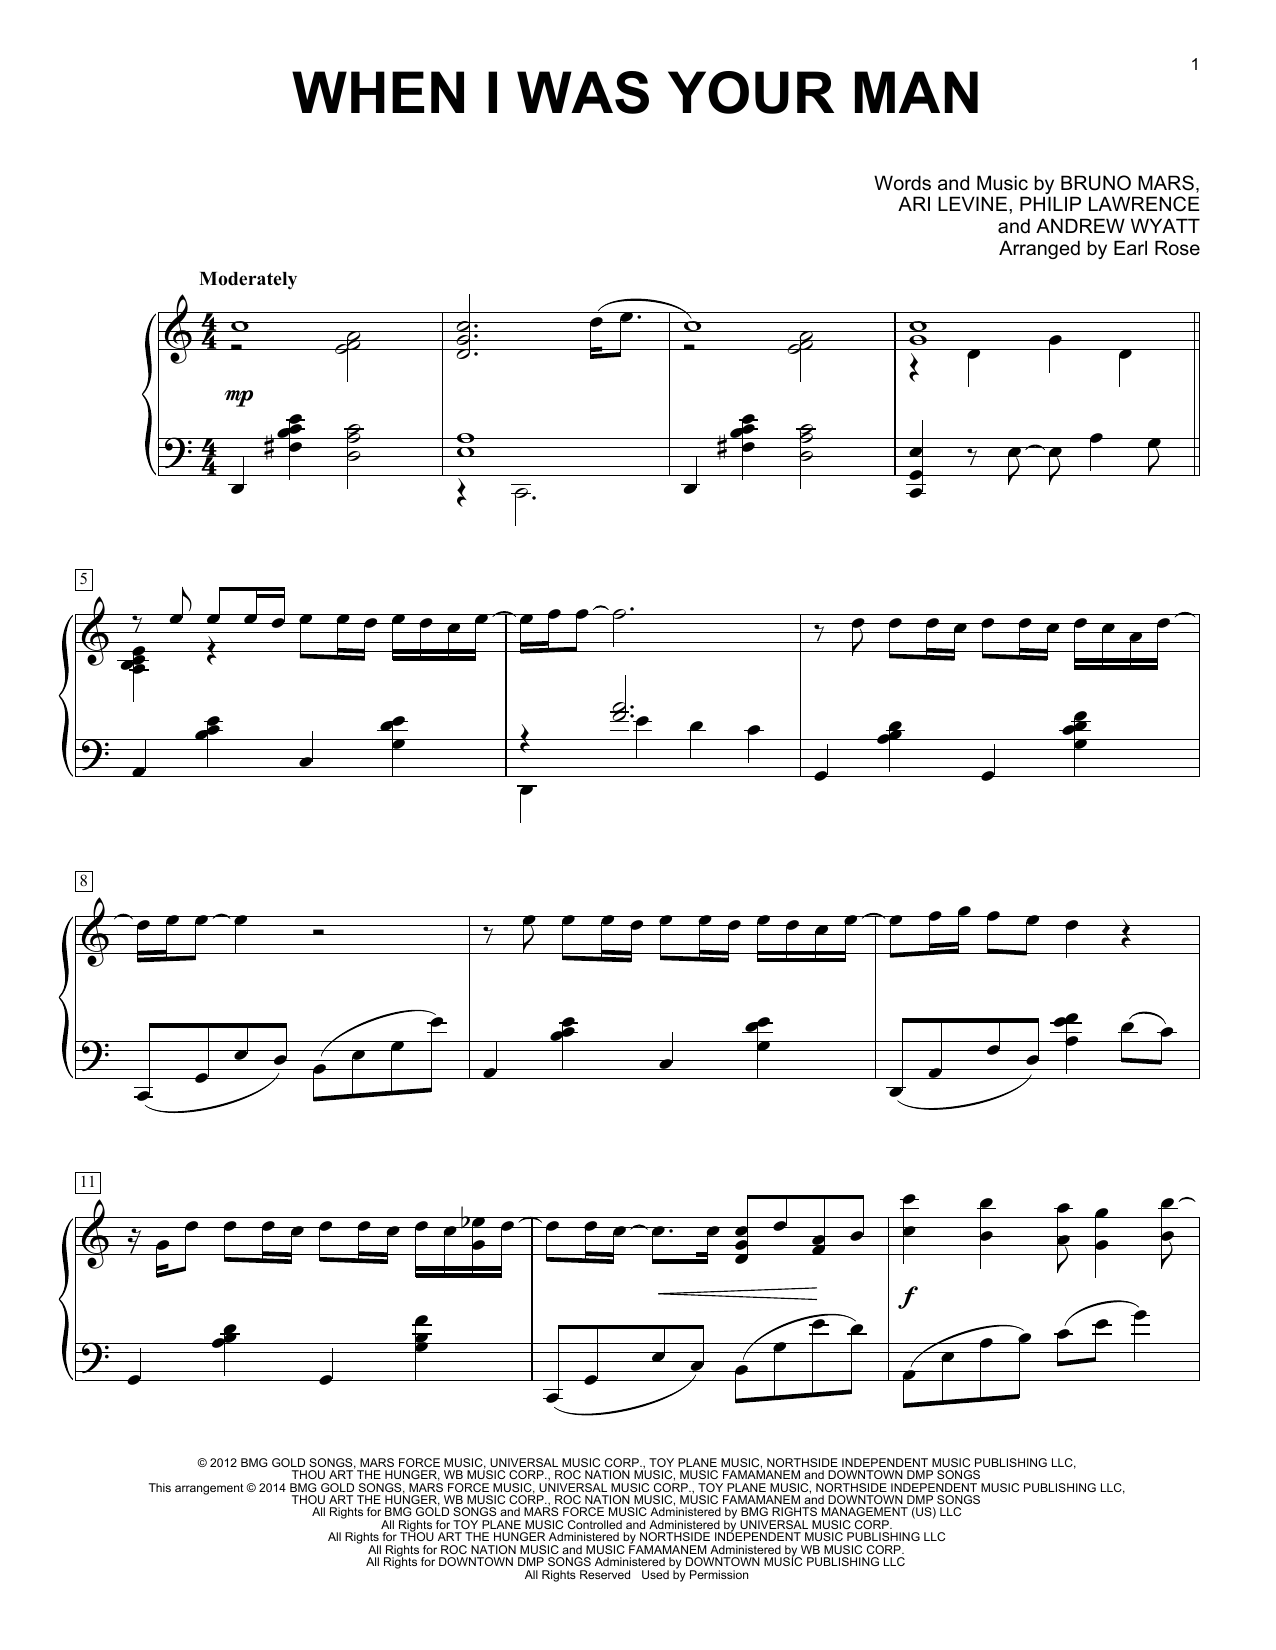 Earl Rose When I Was Your Man Sheet Music Pdf Notes Chords Rock Score Piano Solo Download Printable Sku 156797